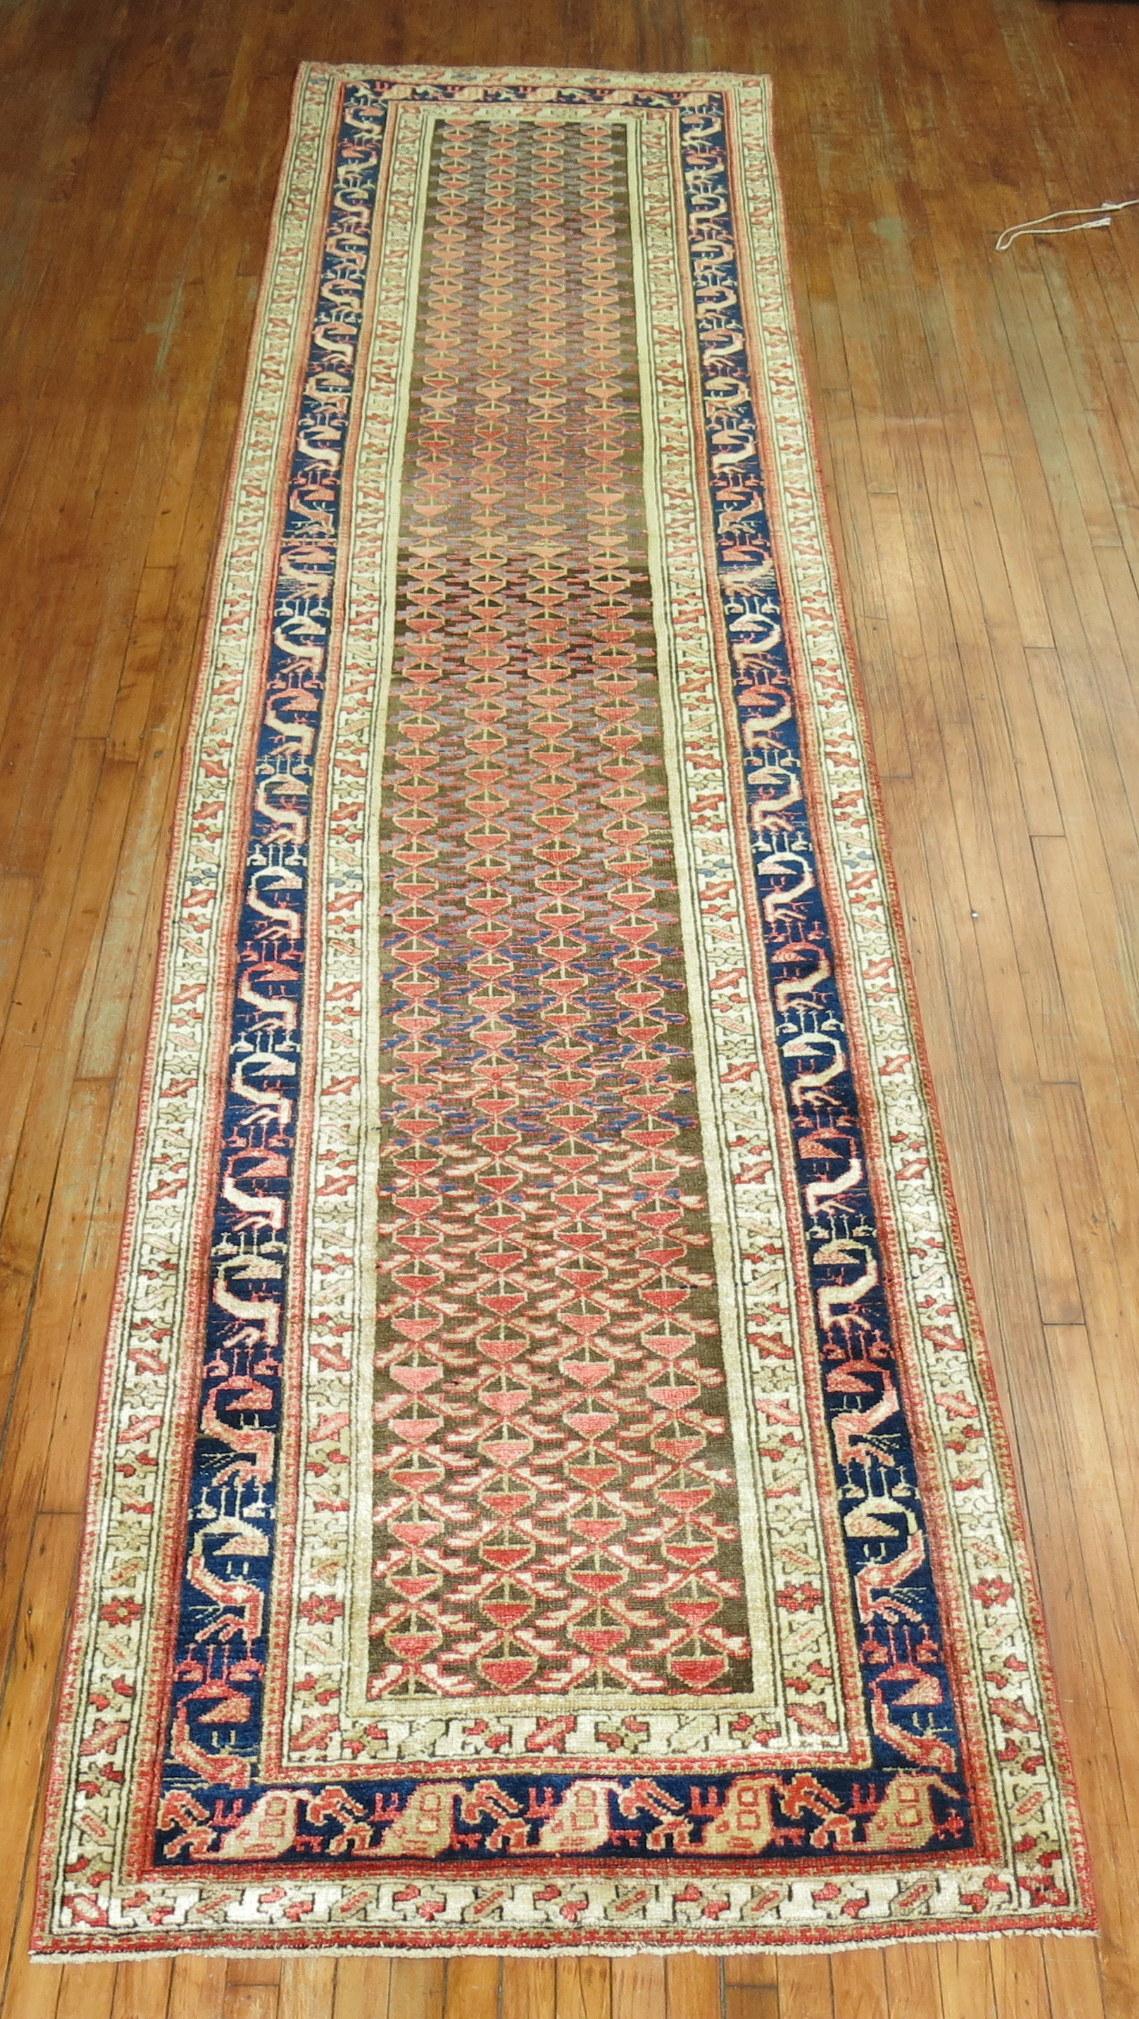 A decorative Persian Malayer wide runner from the 1930's

Size: 3'9” x 15'3”.